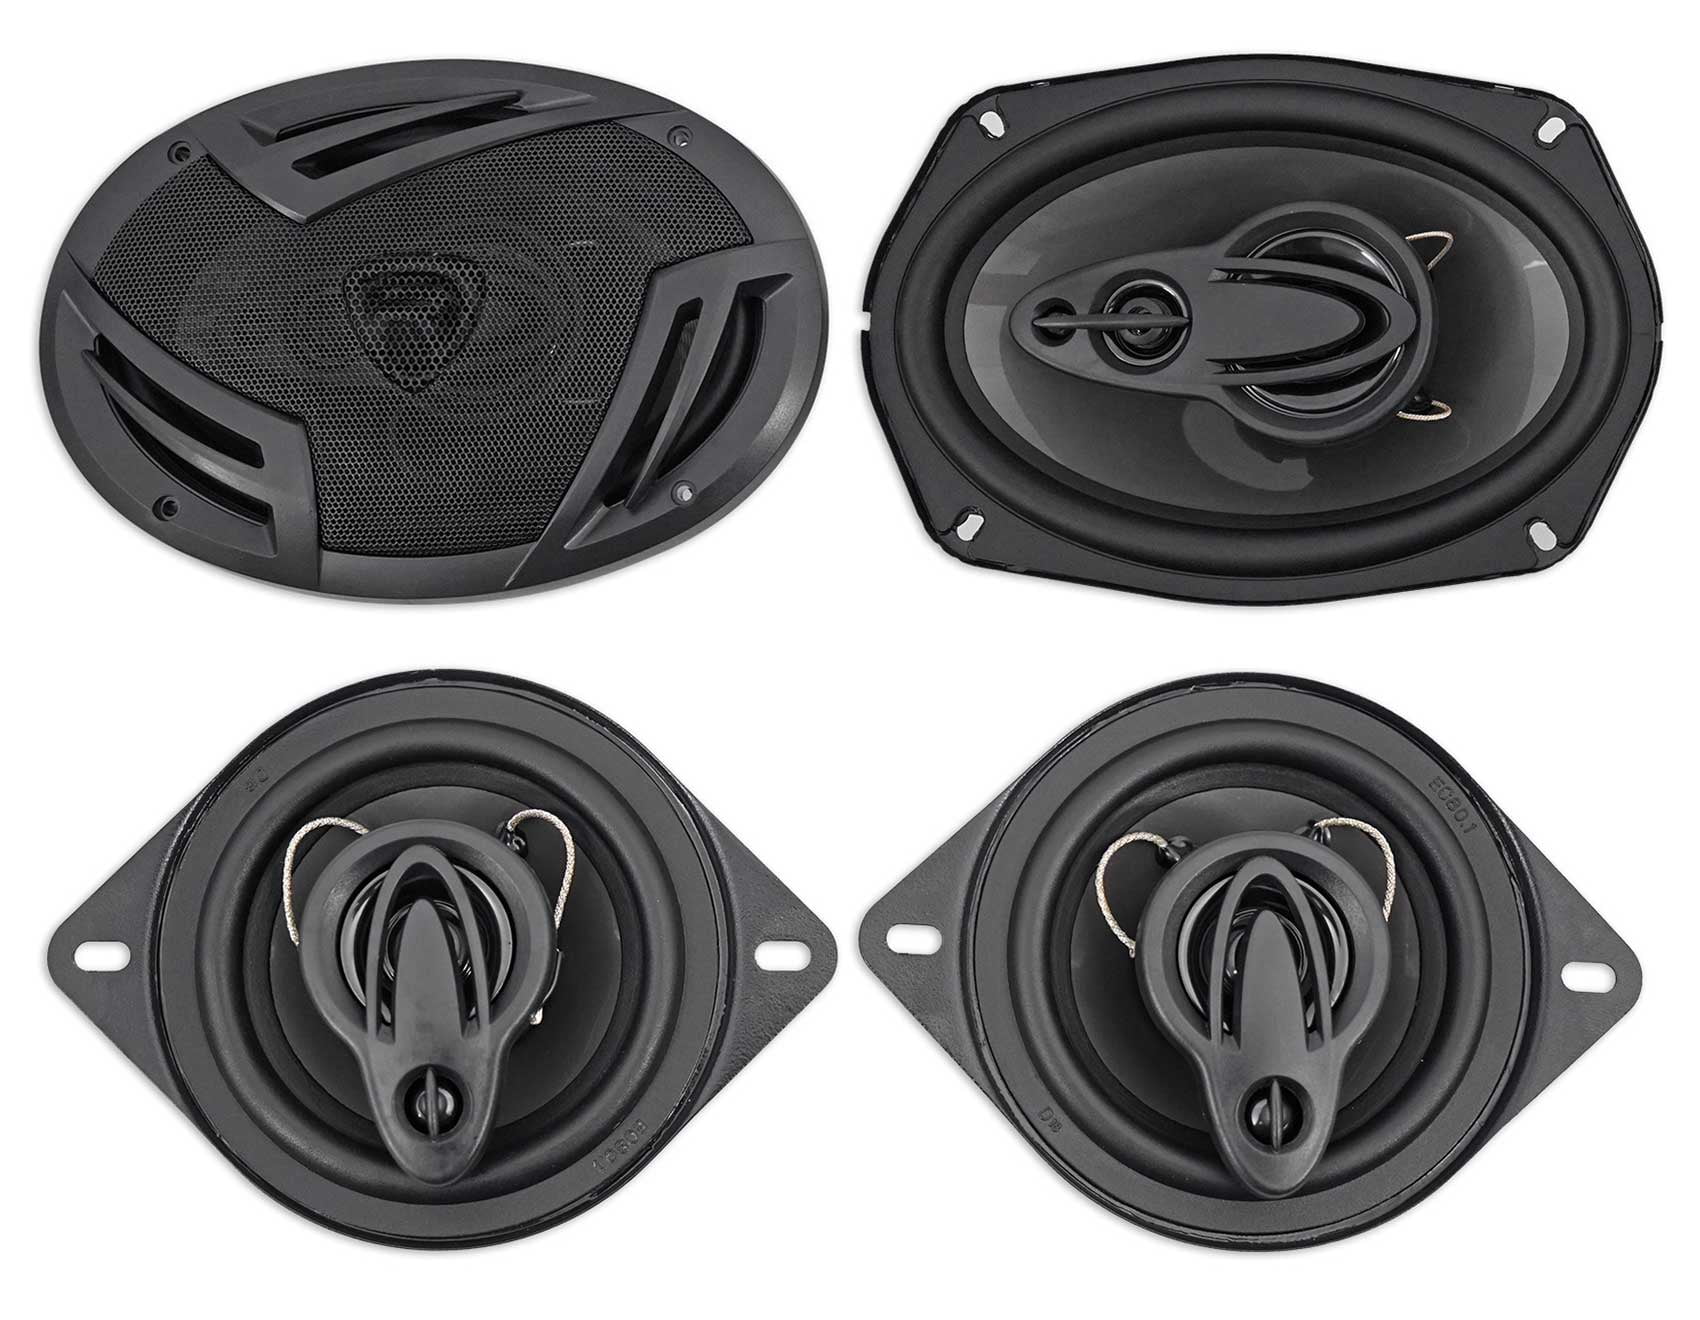 Pair Rockville RV69.2C 6x9 Component Car Speakers 1000 Watts/220w RMS CEA Rated 